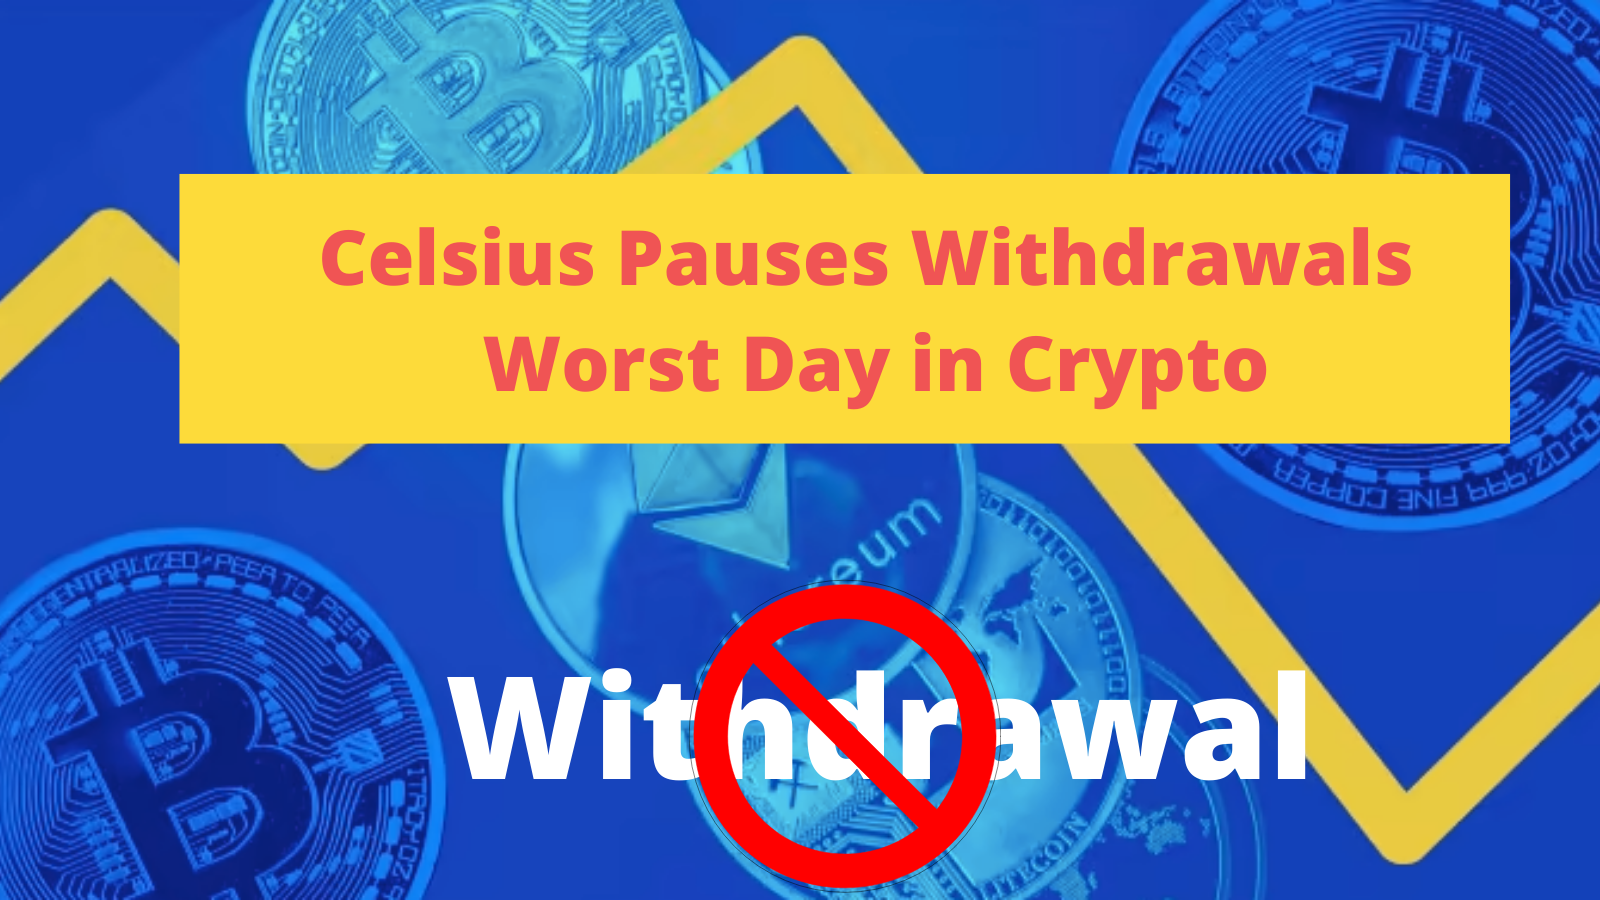 Celsius pauses withdrawals | Worst day in Crypto